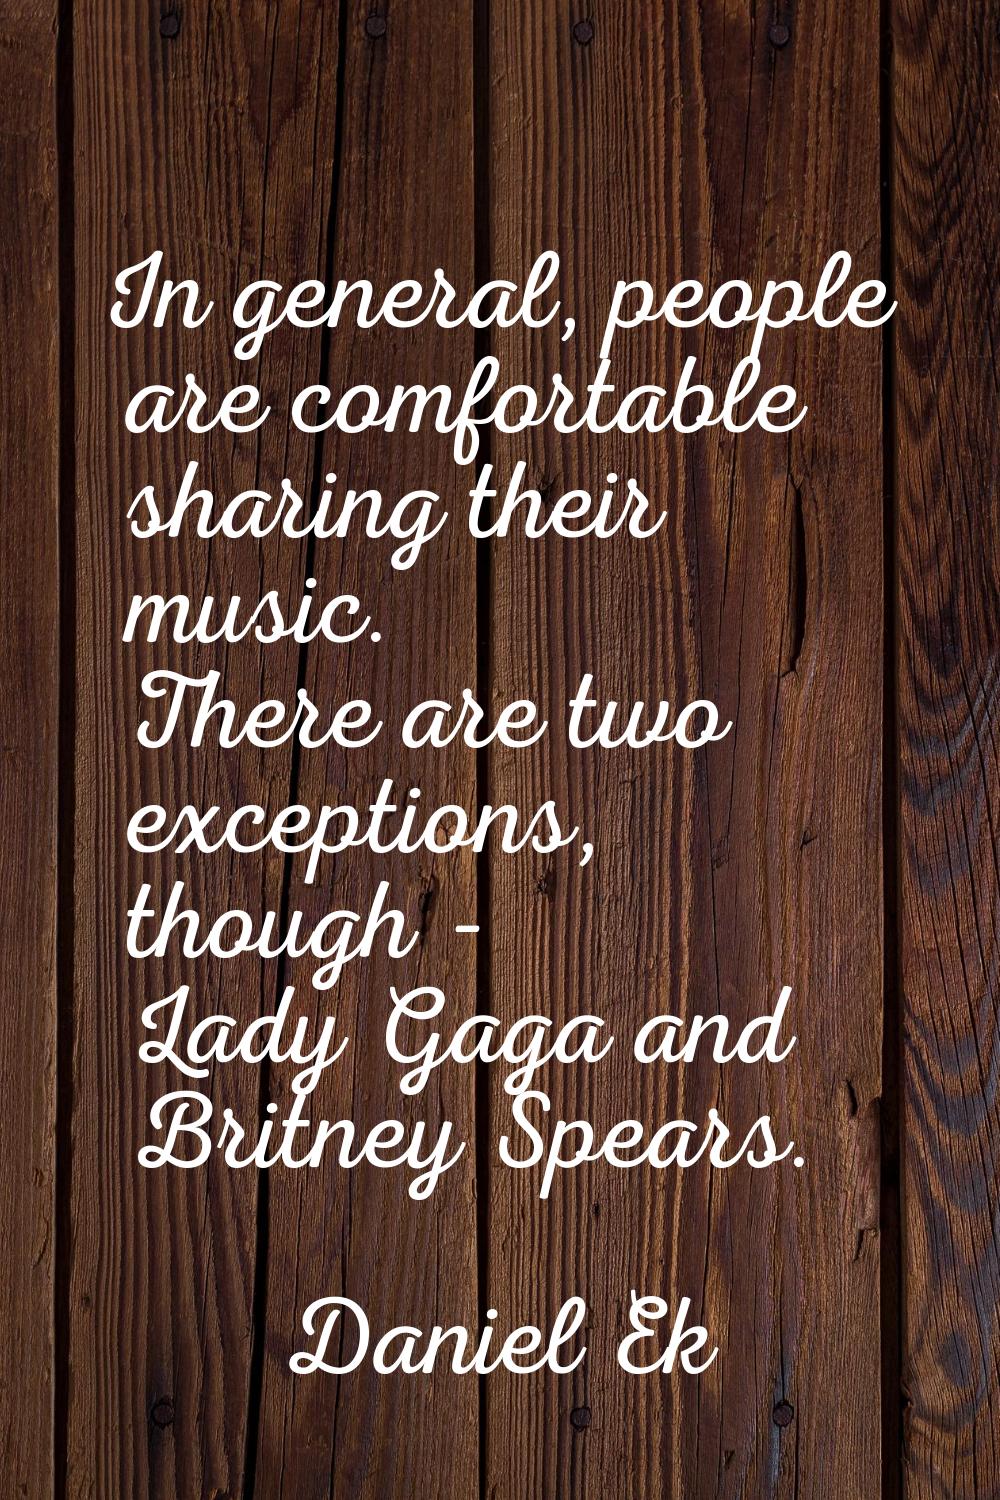 In general, people are comfortable sharing their music. There are two exceptions, though - Lady Gag